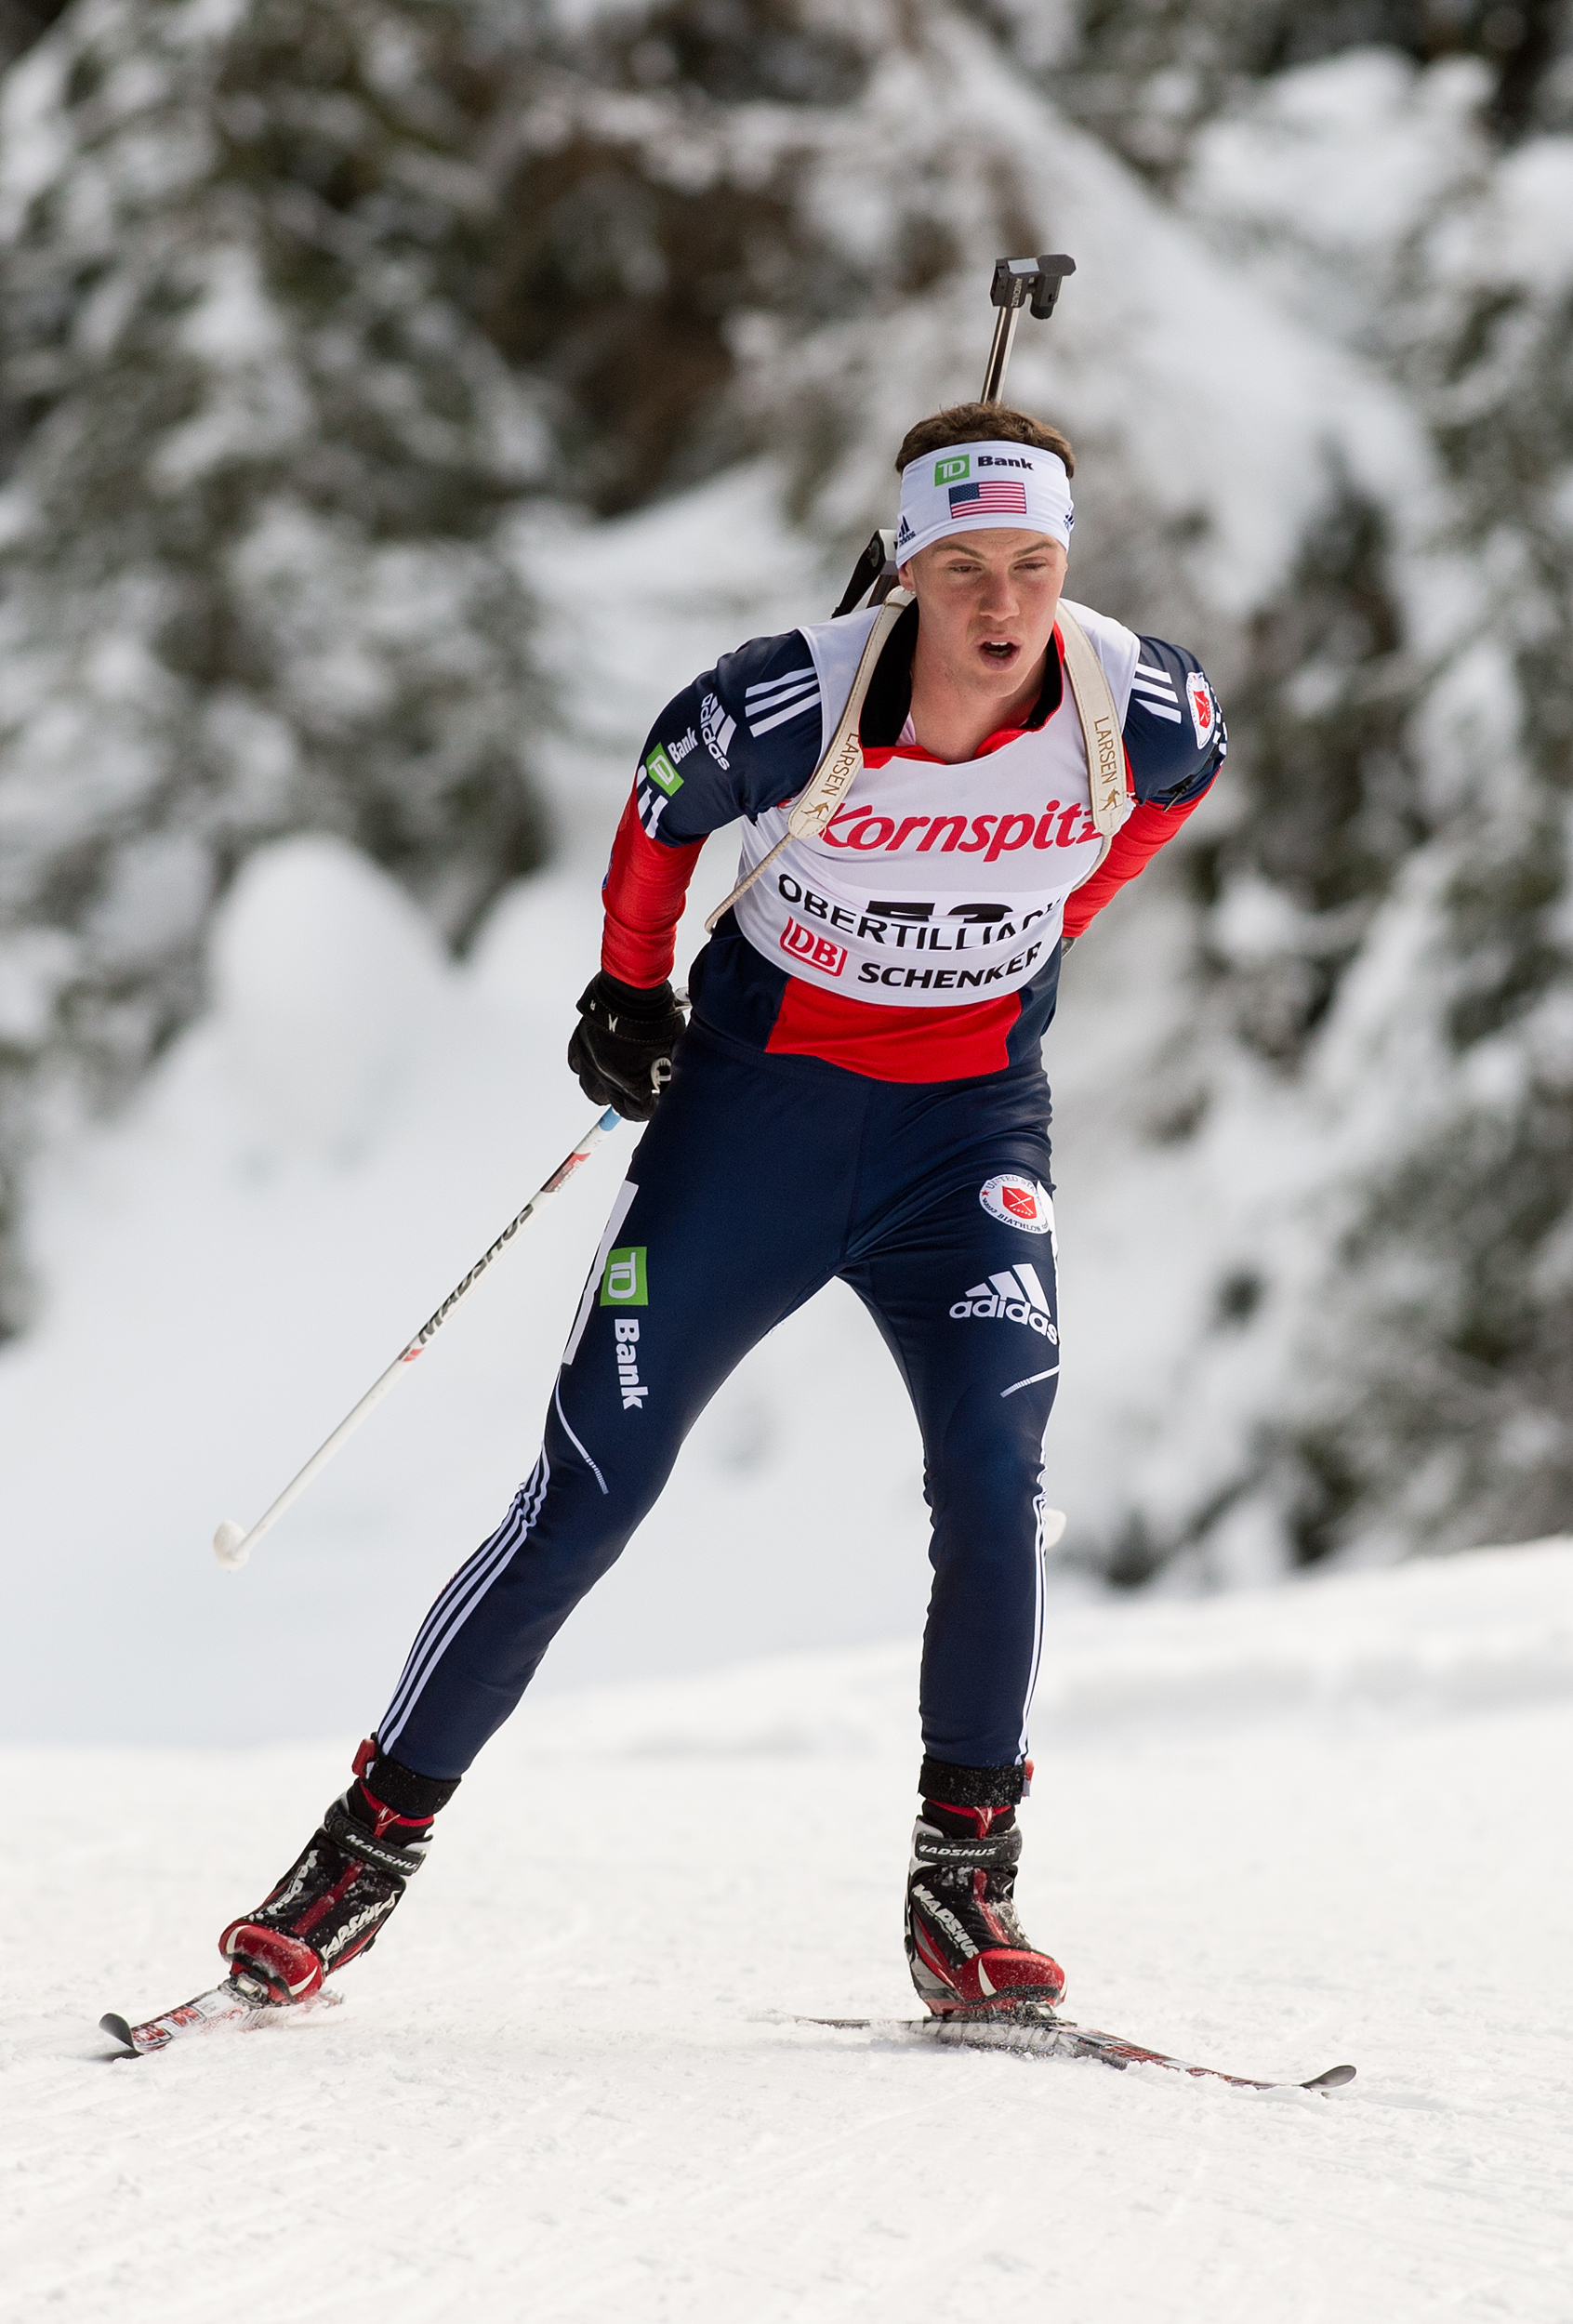 U.S. Biathletes Smith and Dalberg Look Back on World Juniors That Was, Forward to More European Racing